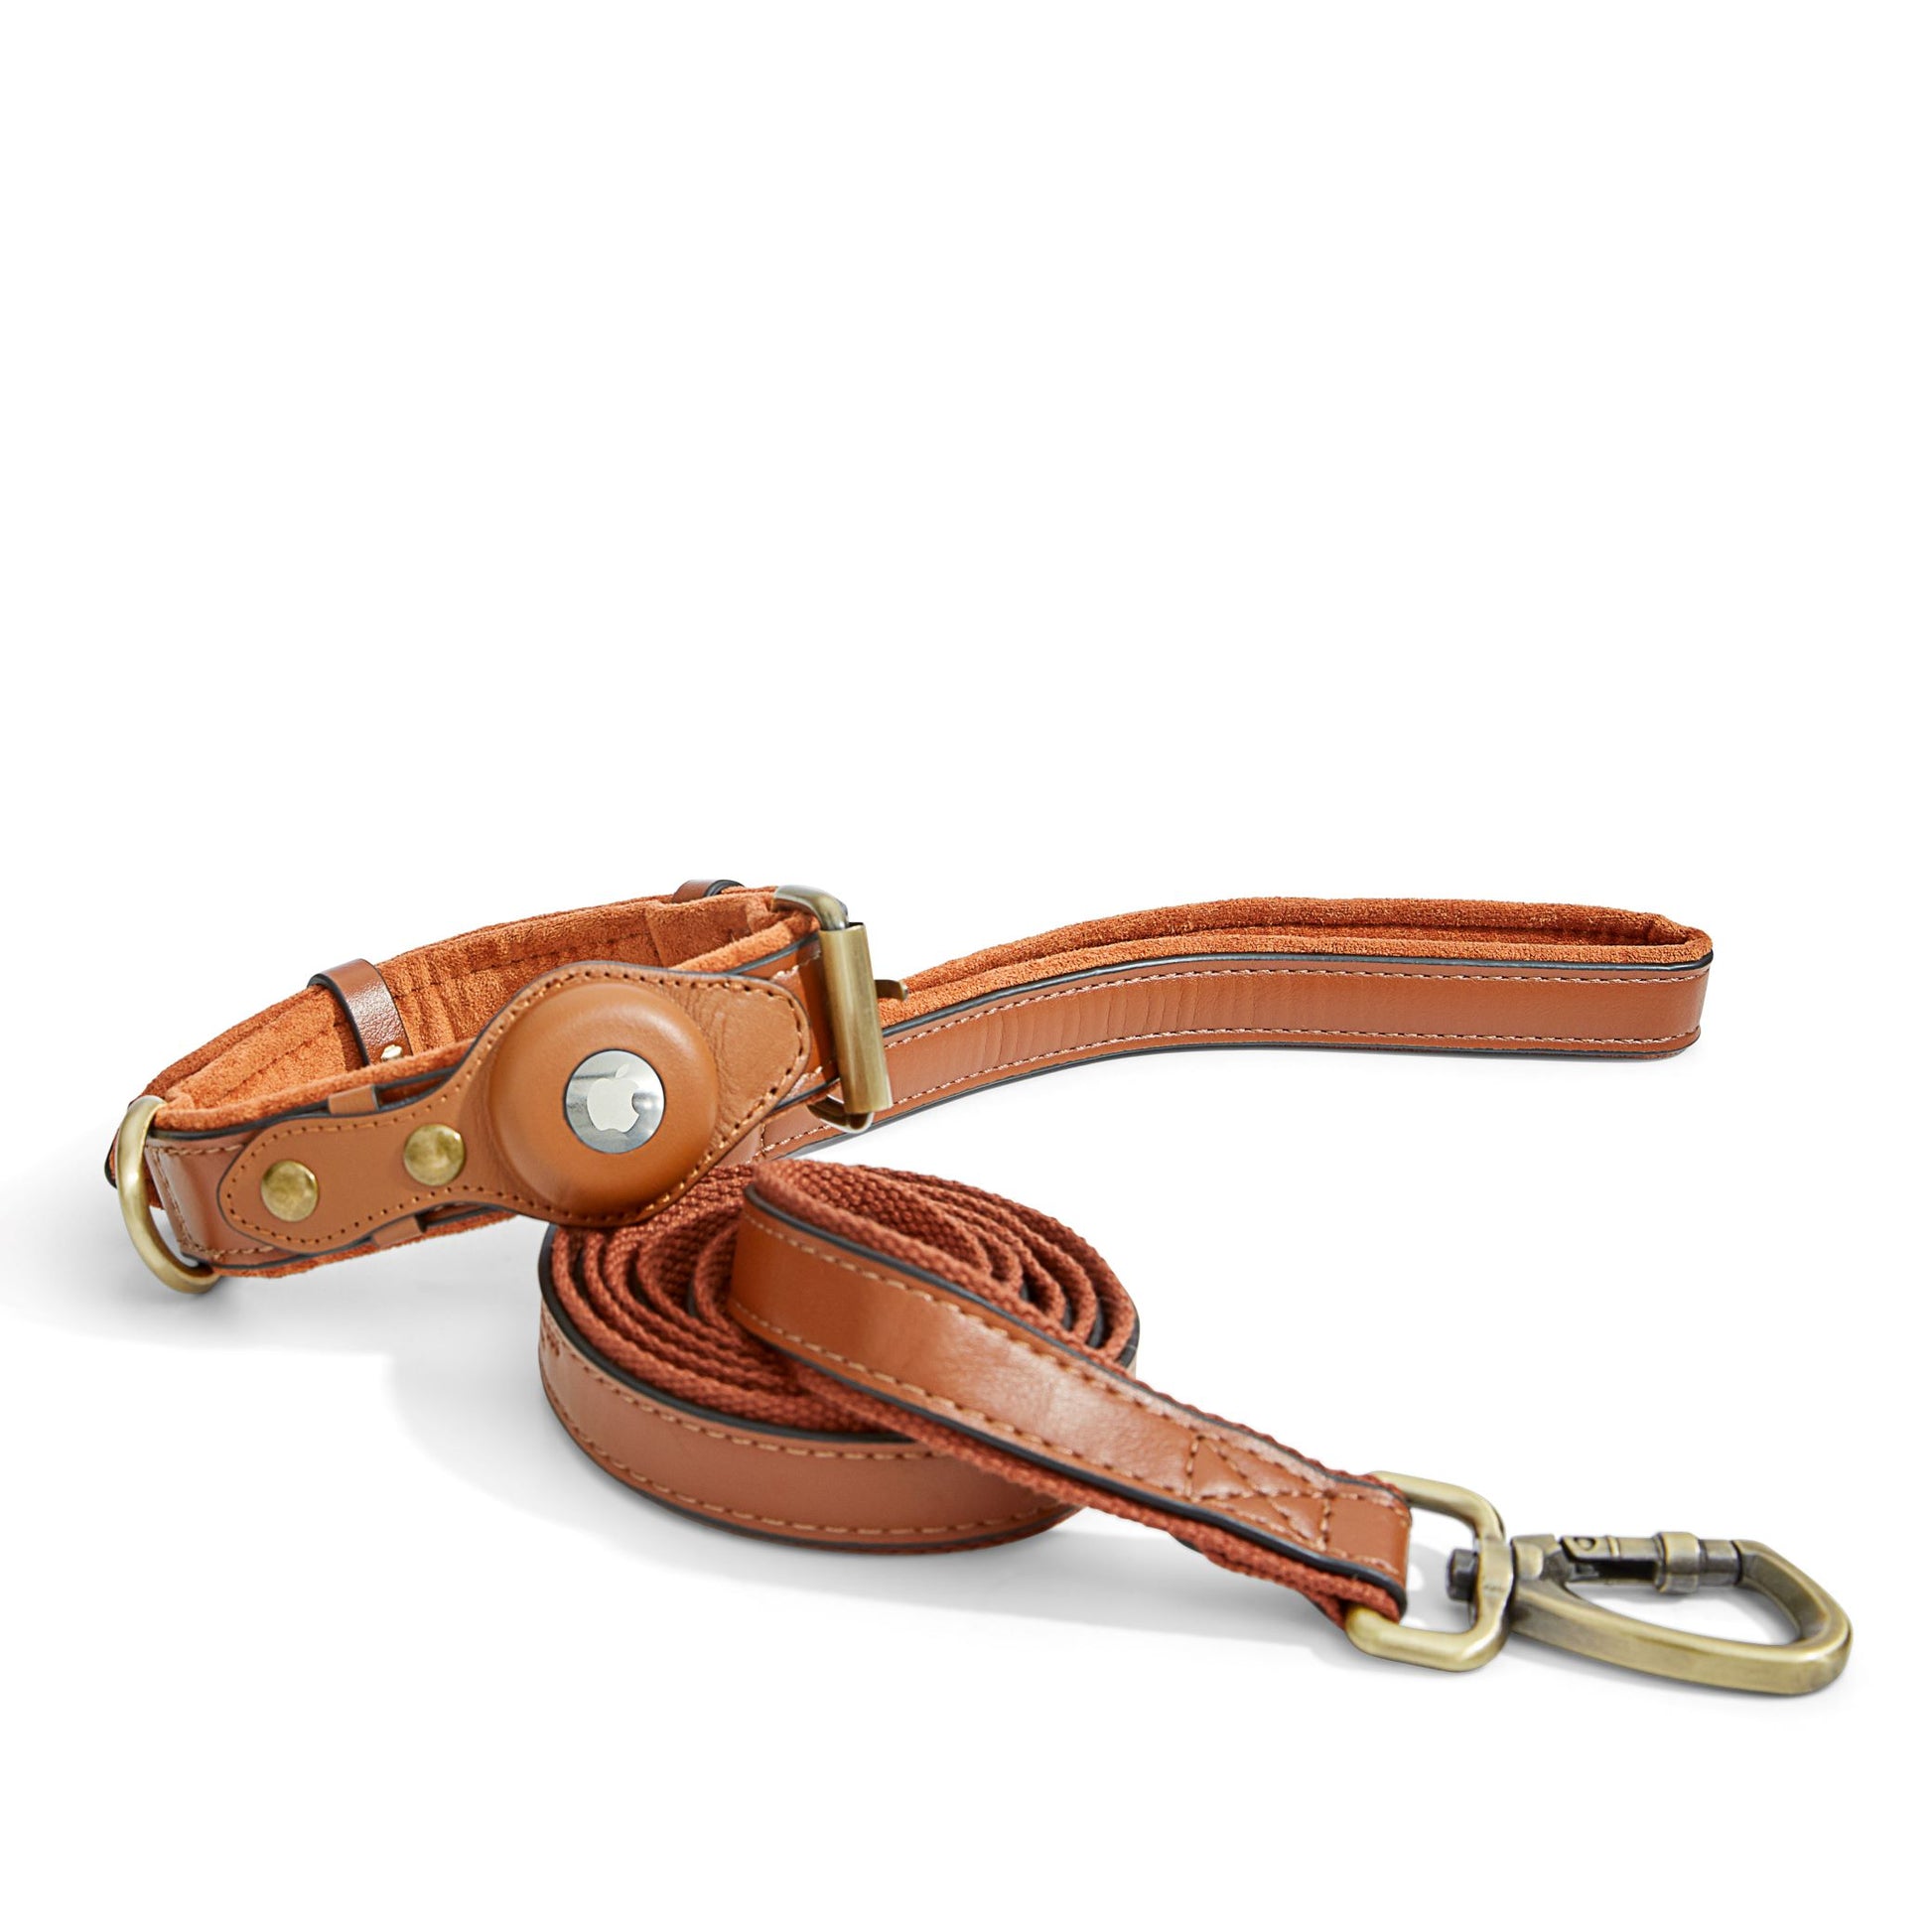 Orchard browm airtag collar and leash set with custom air tag holder. Strong antique brass buckles and clasps.  Reinforced backing on the leash.